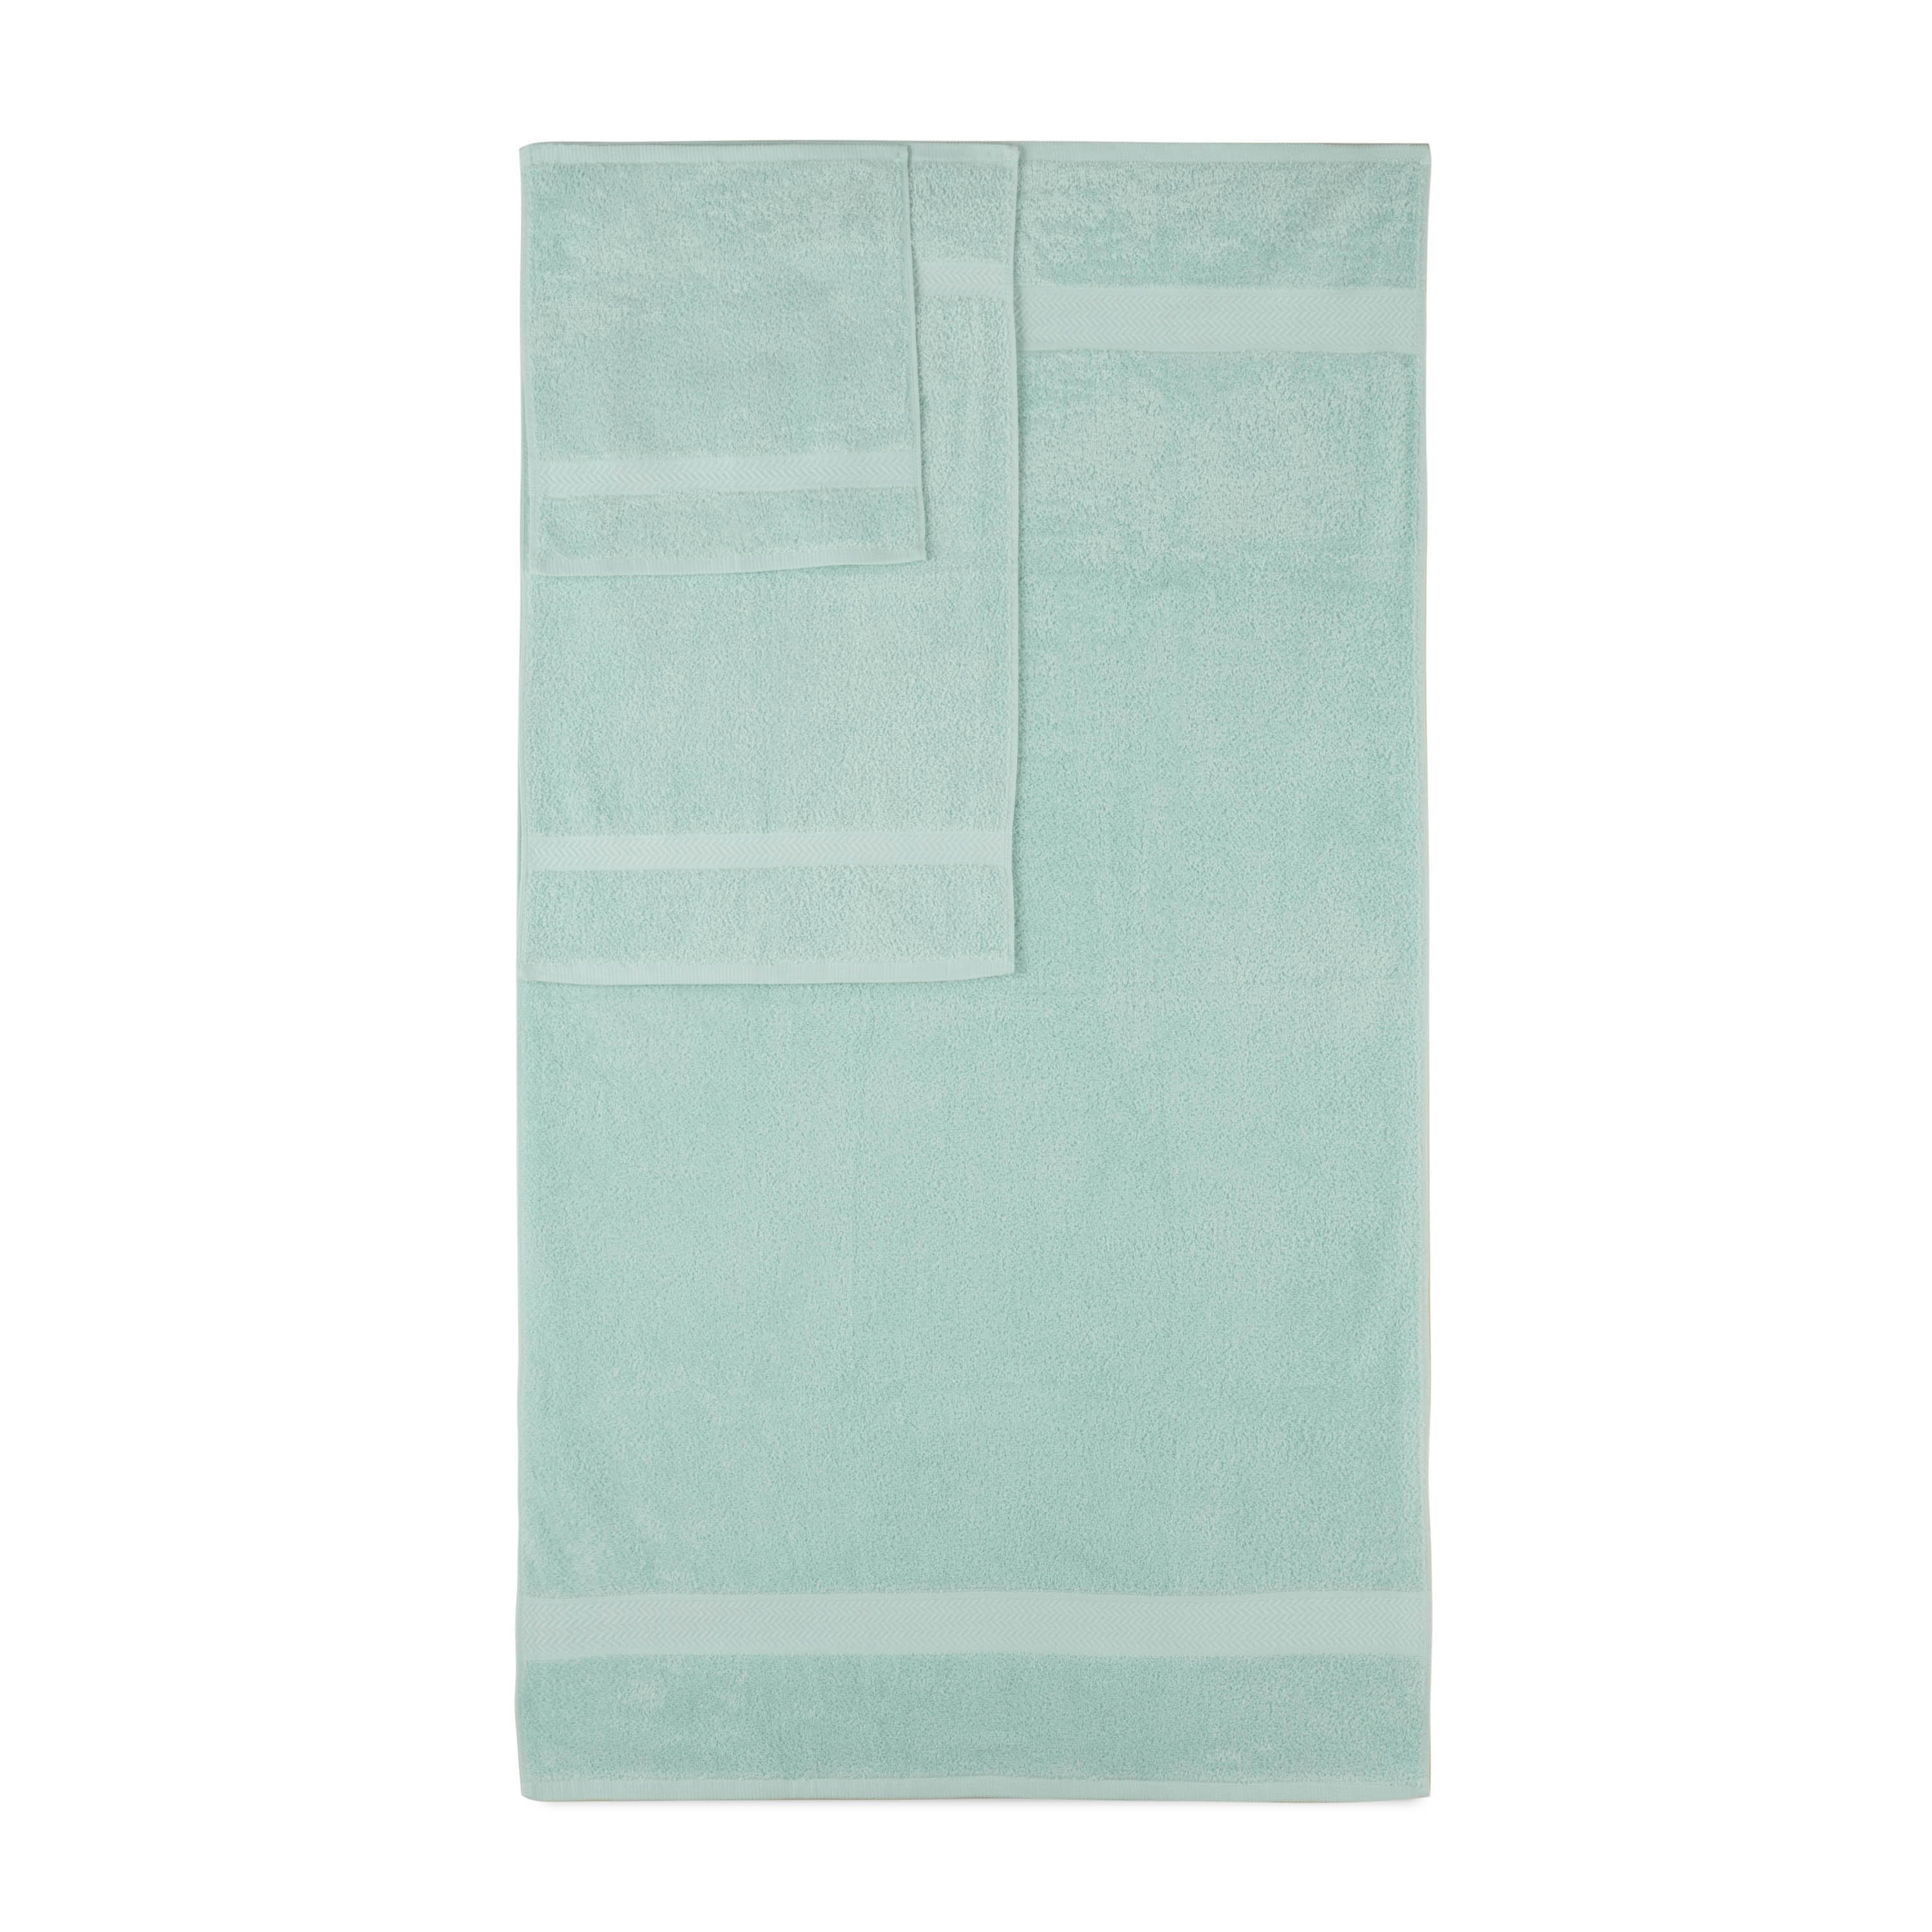 Martex® Resort Pool Towel Collection – Now Linens